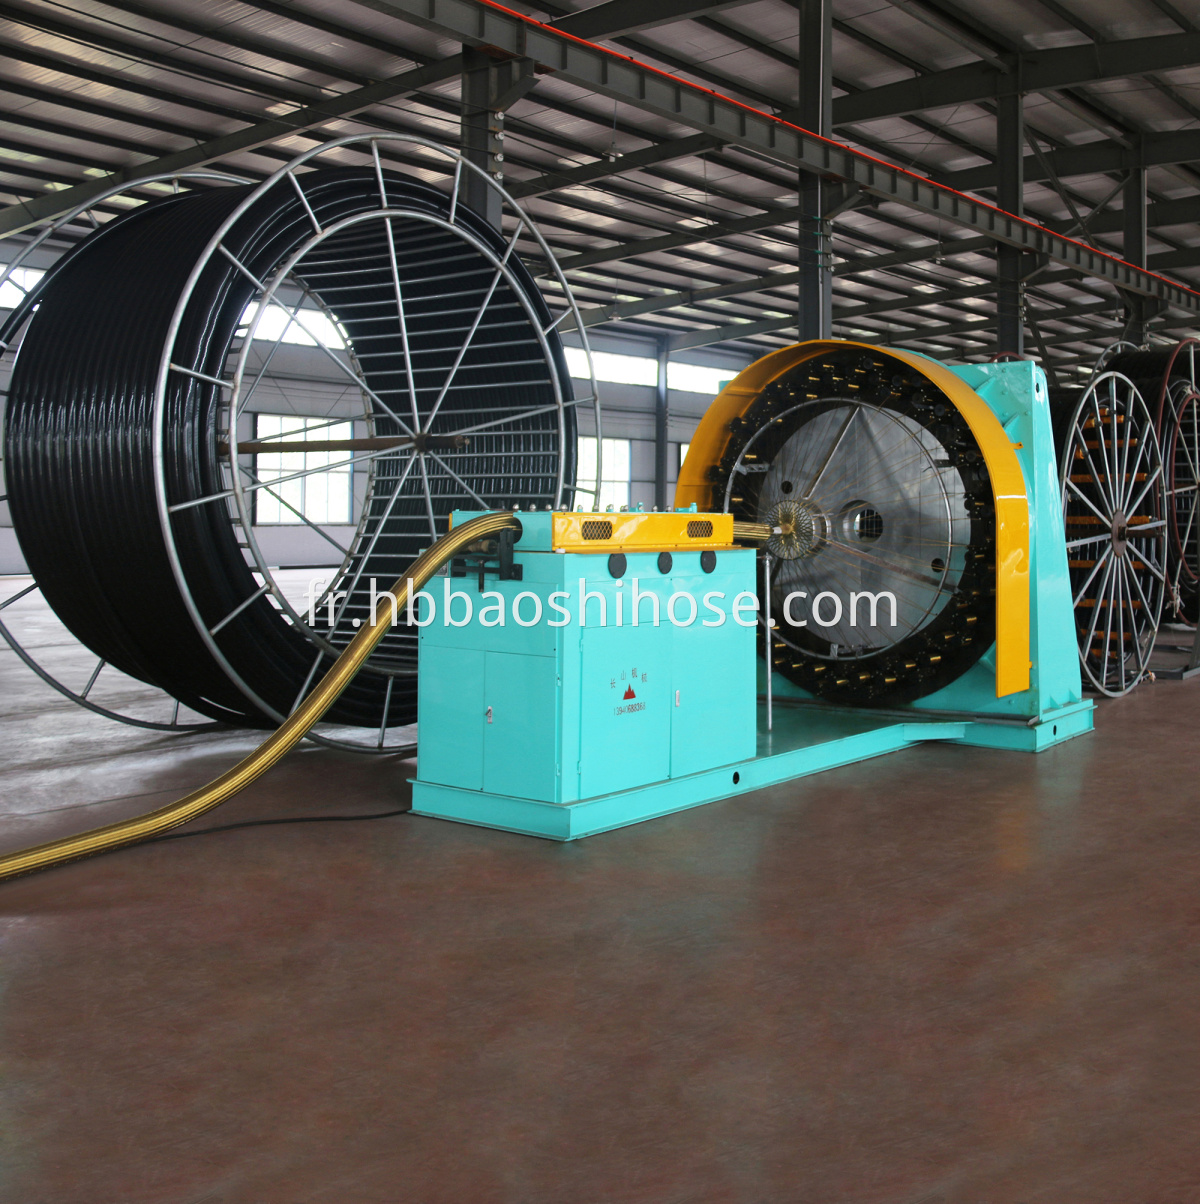 UHMWPE Braided Composite Pipeline